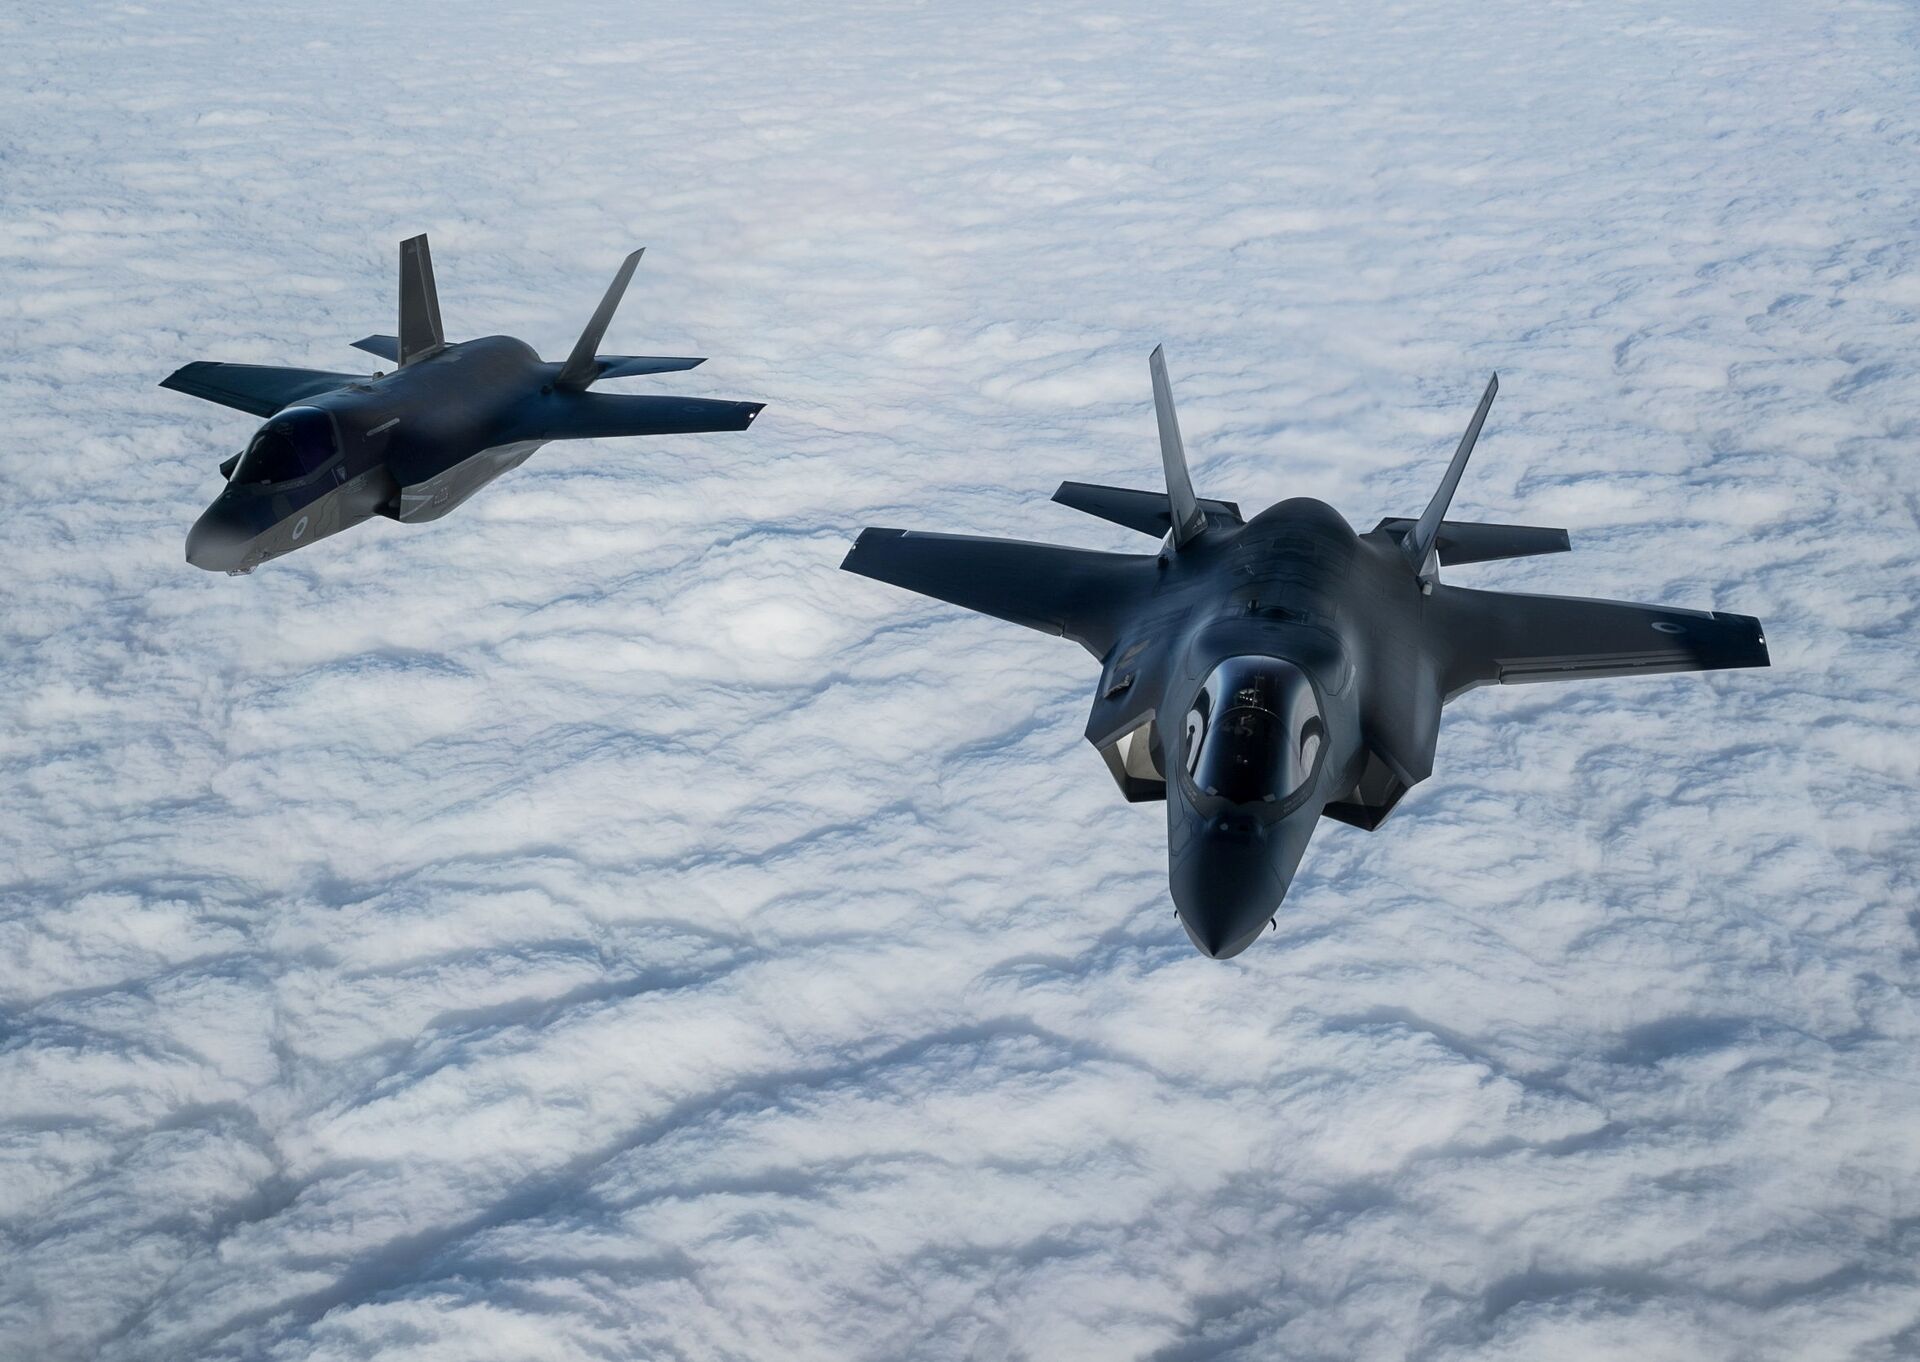 A pair of RAF F-35B Lightning fighter jets flies over The English Channel during the Point Blank exercise after taking off from RAF Mildenhall, Britain, November 27, 2018 - Sputnik International, 1920, 07.09.2021